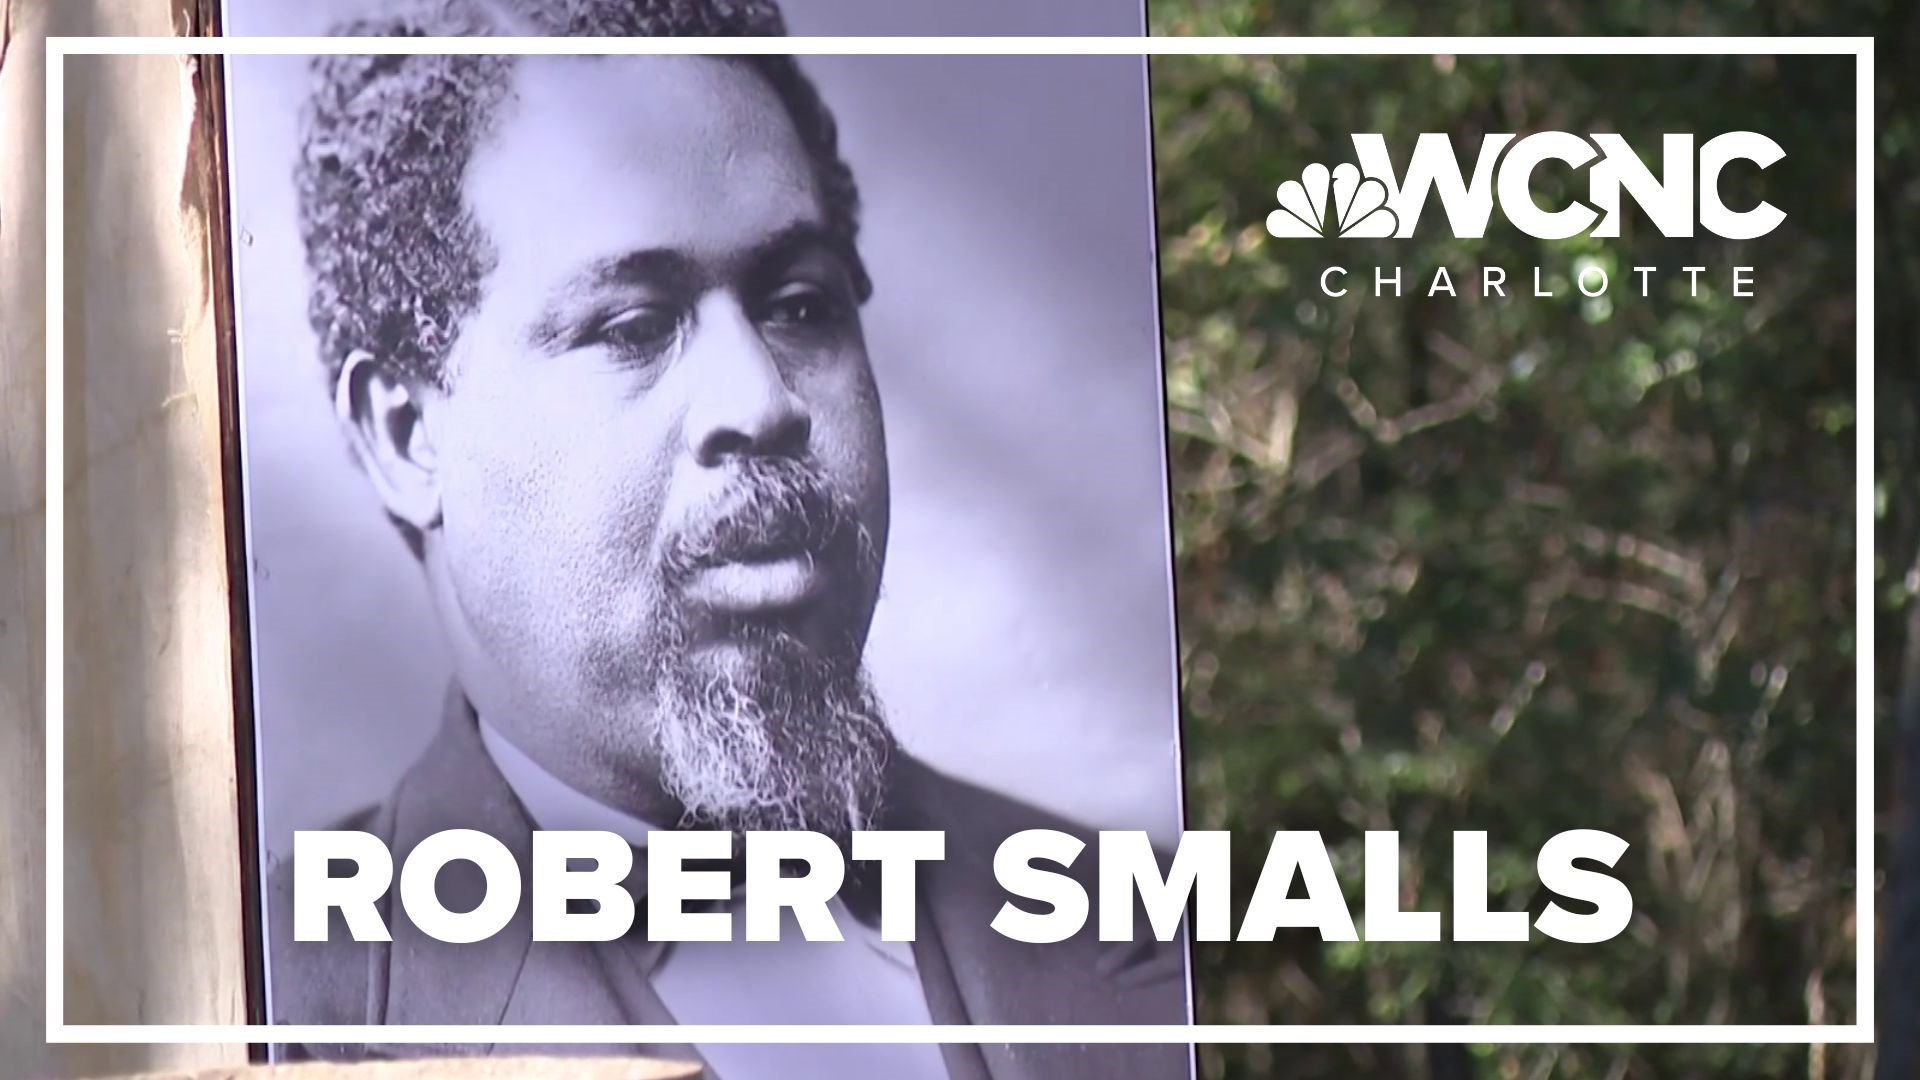 Robert Smalls was a slave who became a Civil War hero and eventual U.S. congressman. Here's how he overcame obstacles in his path to make history.